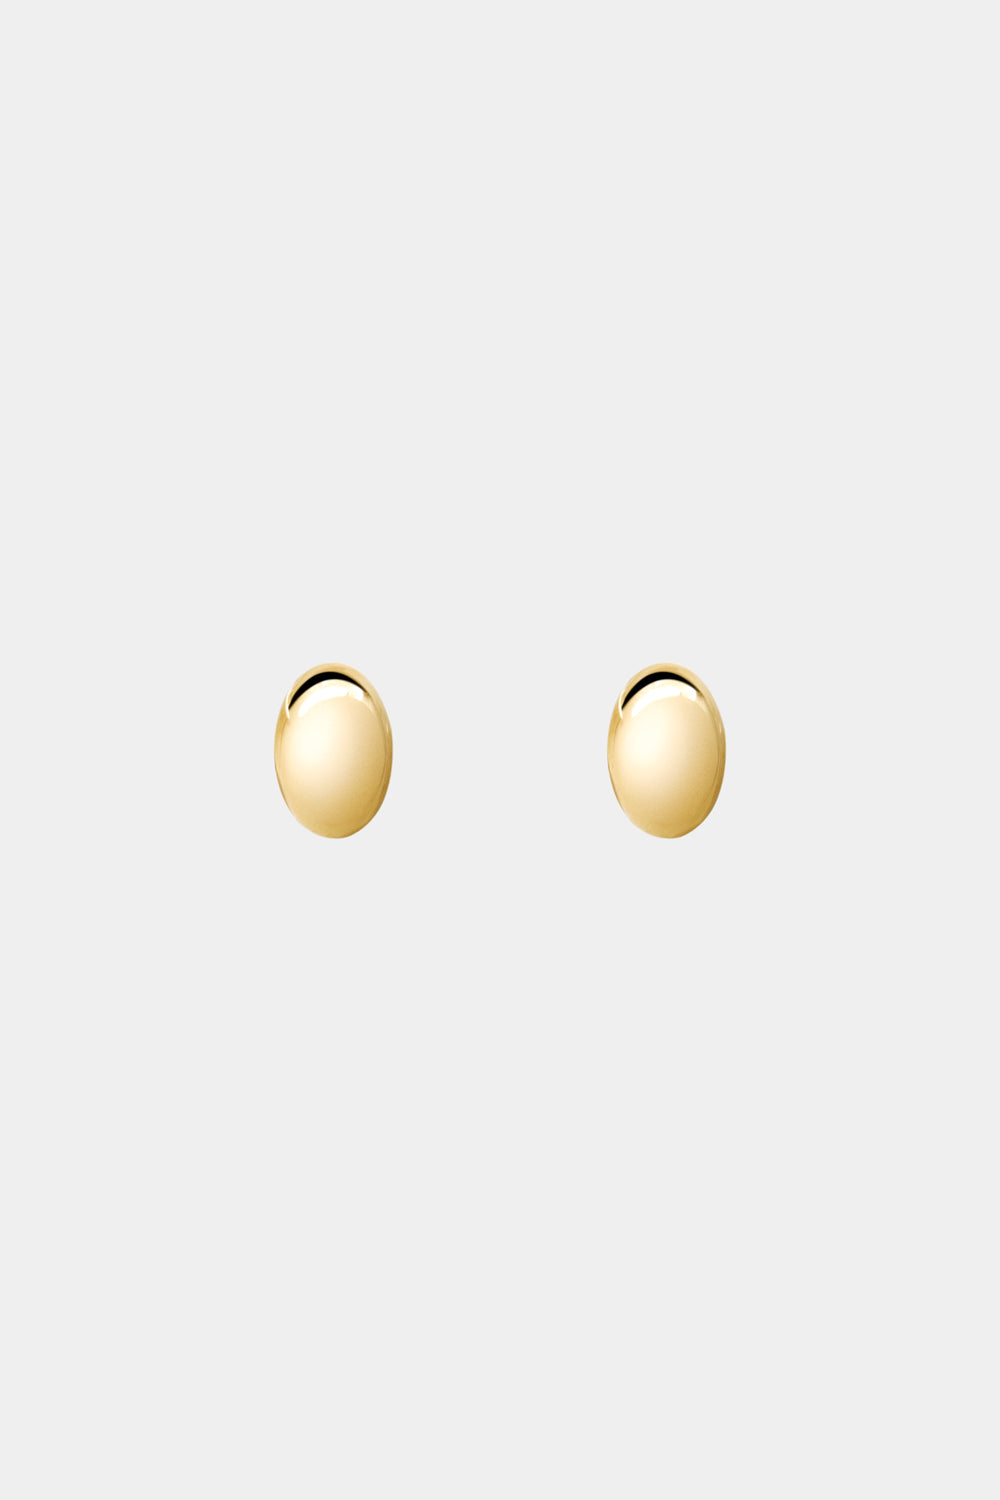 Vivienne Small Oval Studs | 9K Yellow Gold